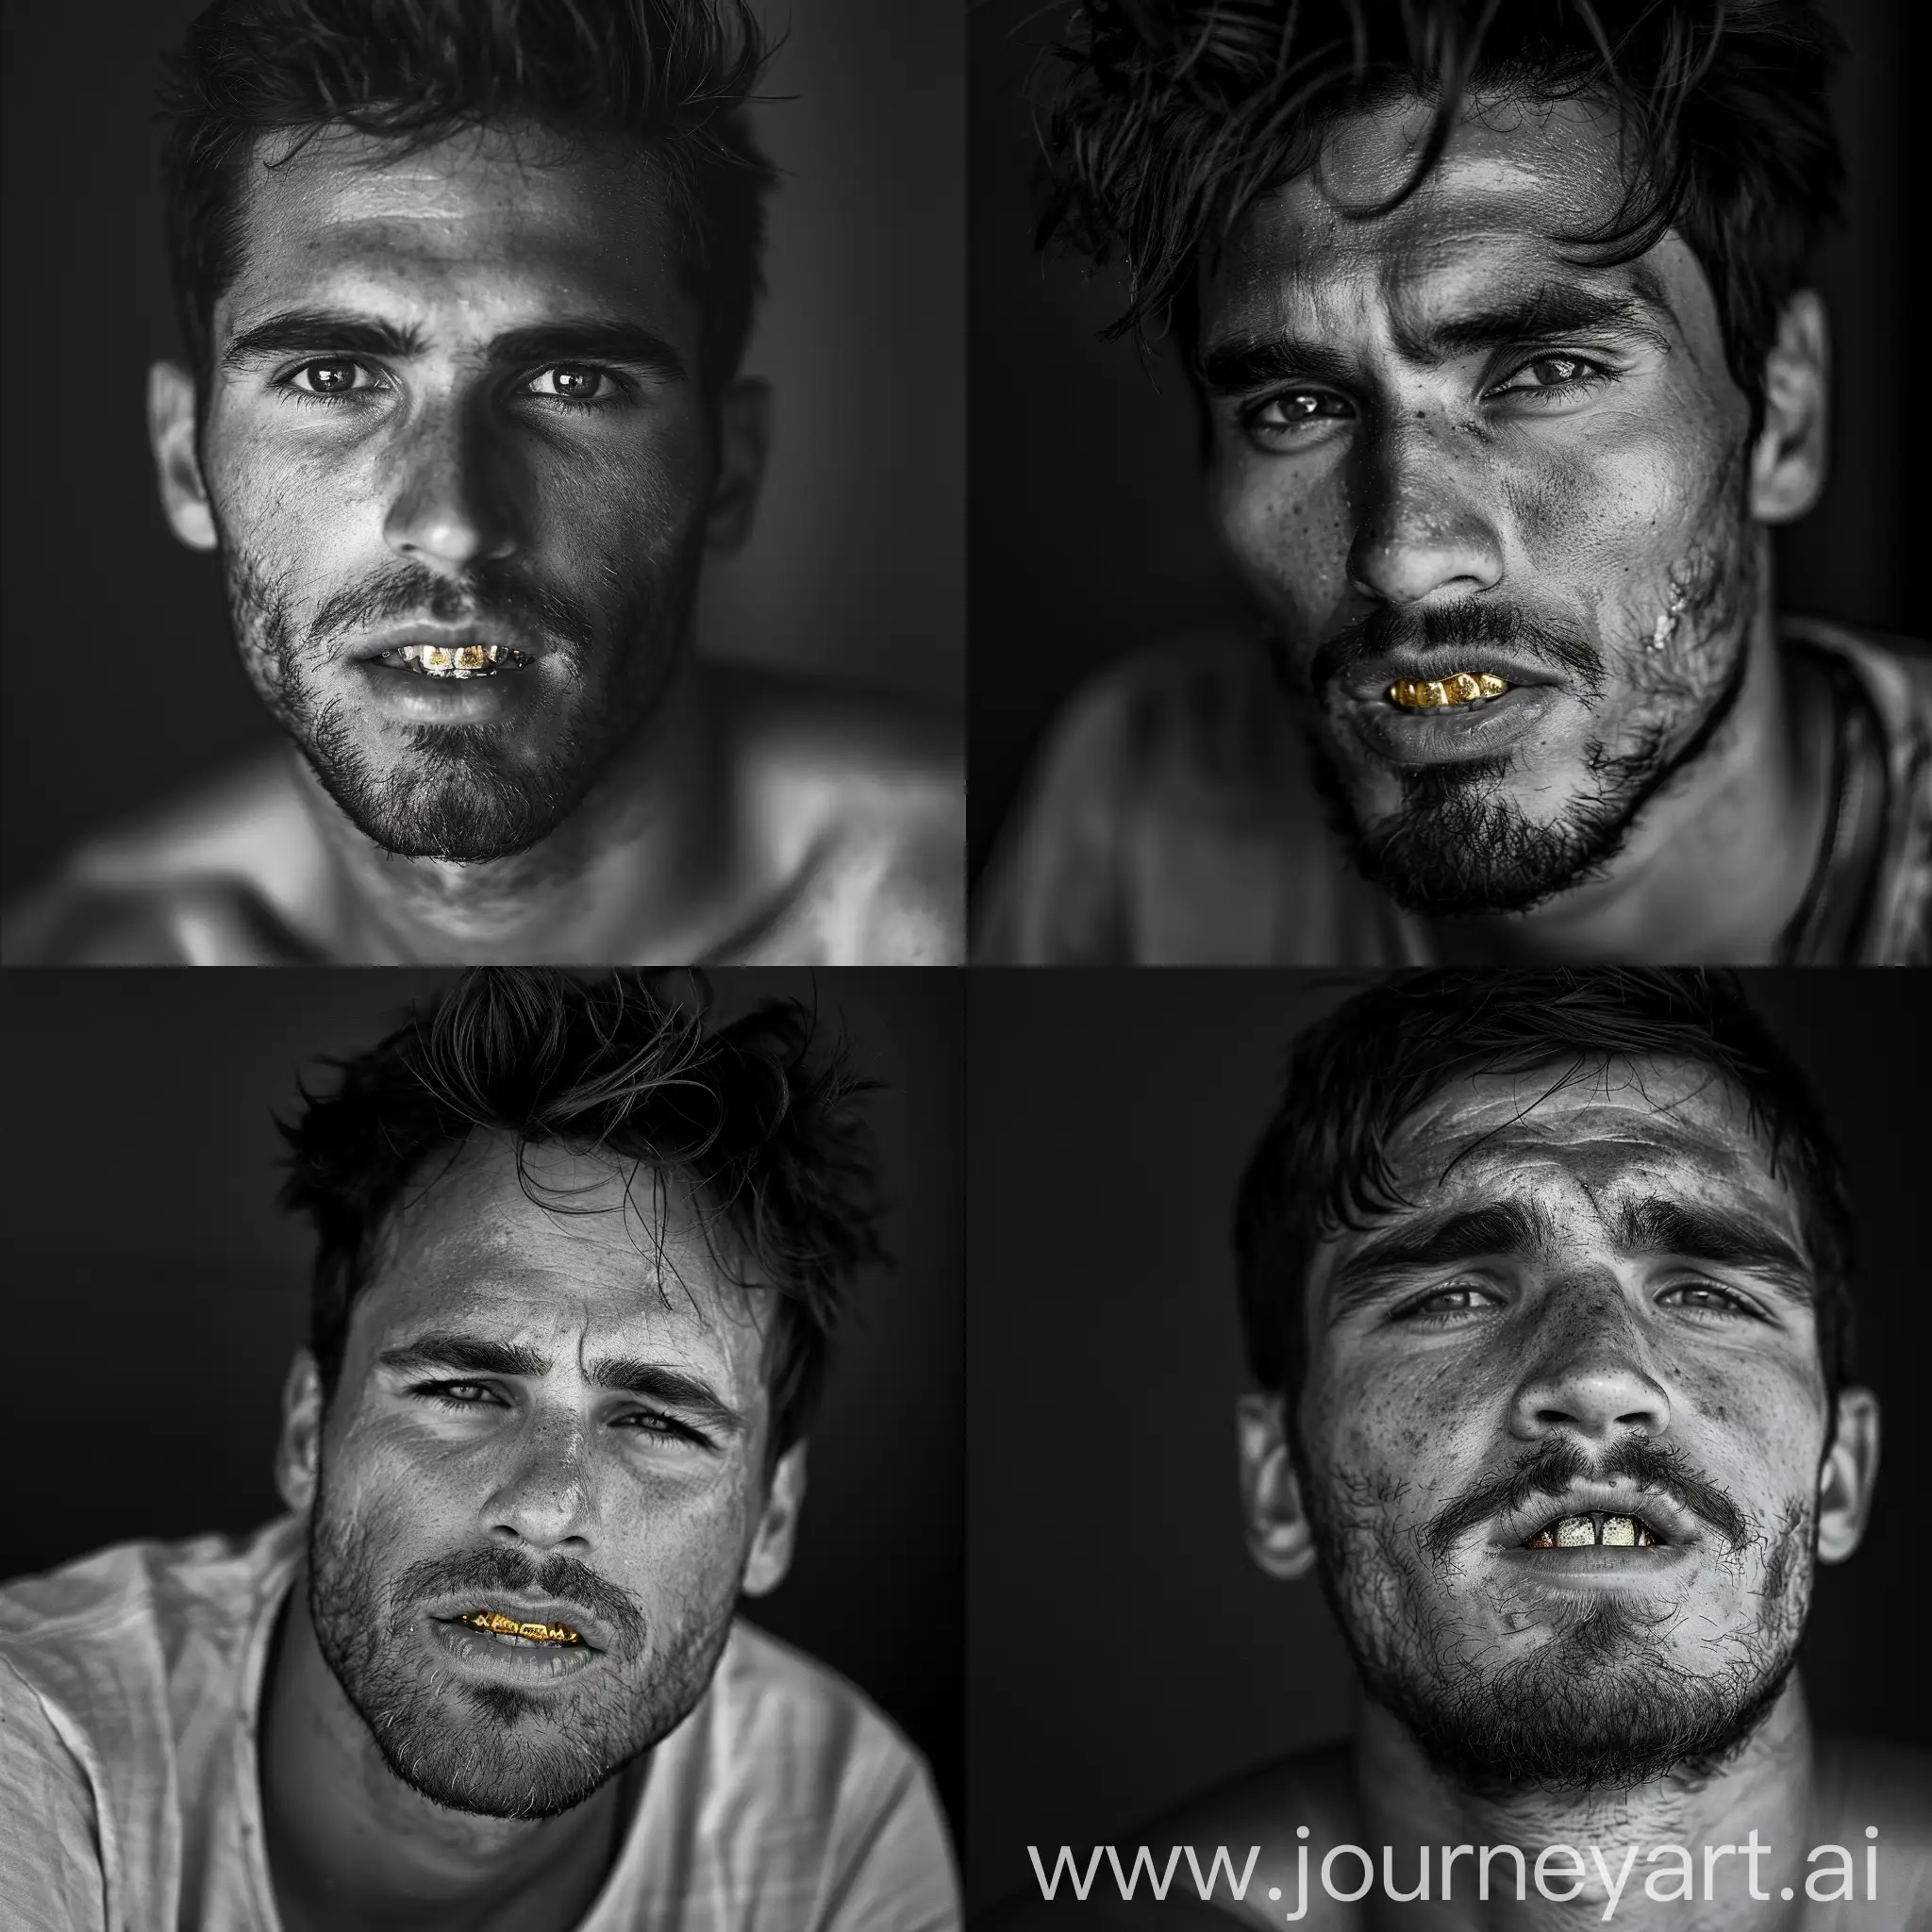 Confident-Black-and-White-Portrait-of-a-Handsome-Man-with-Short-Beard-and-Gold-Teeth